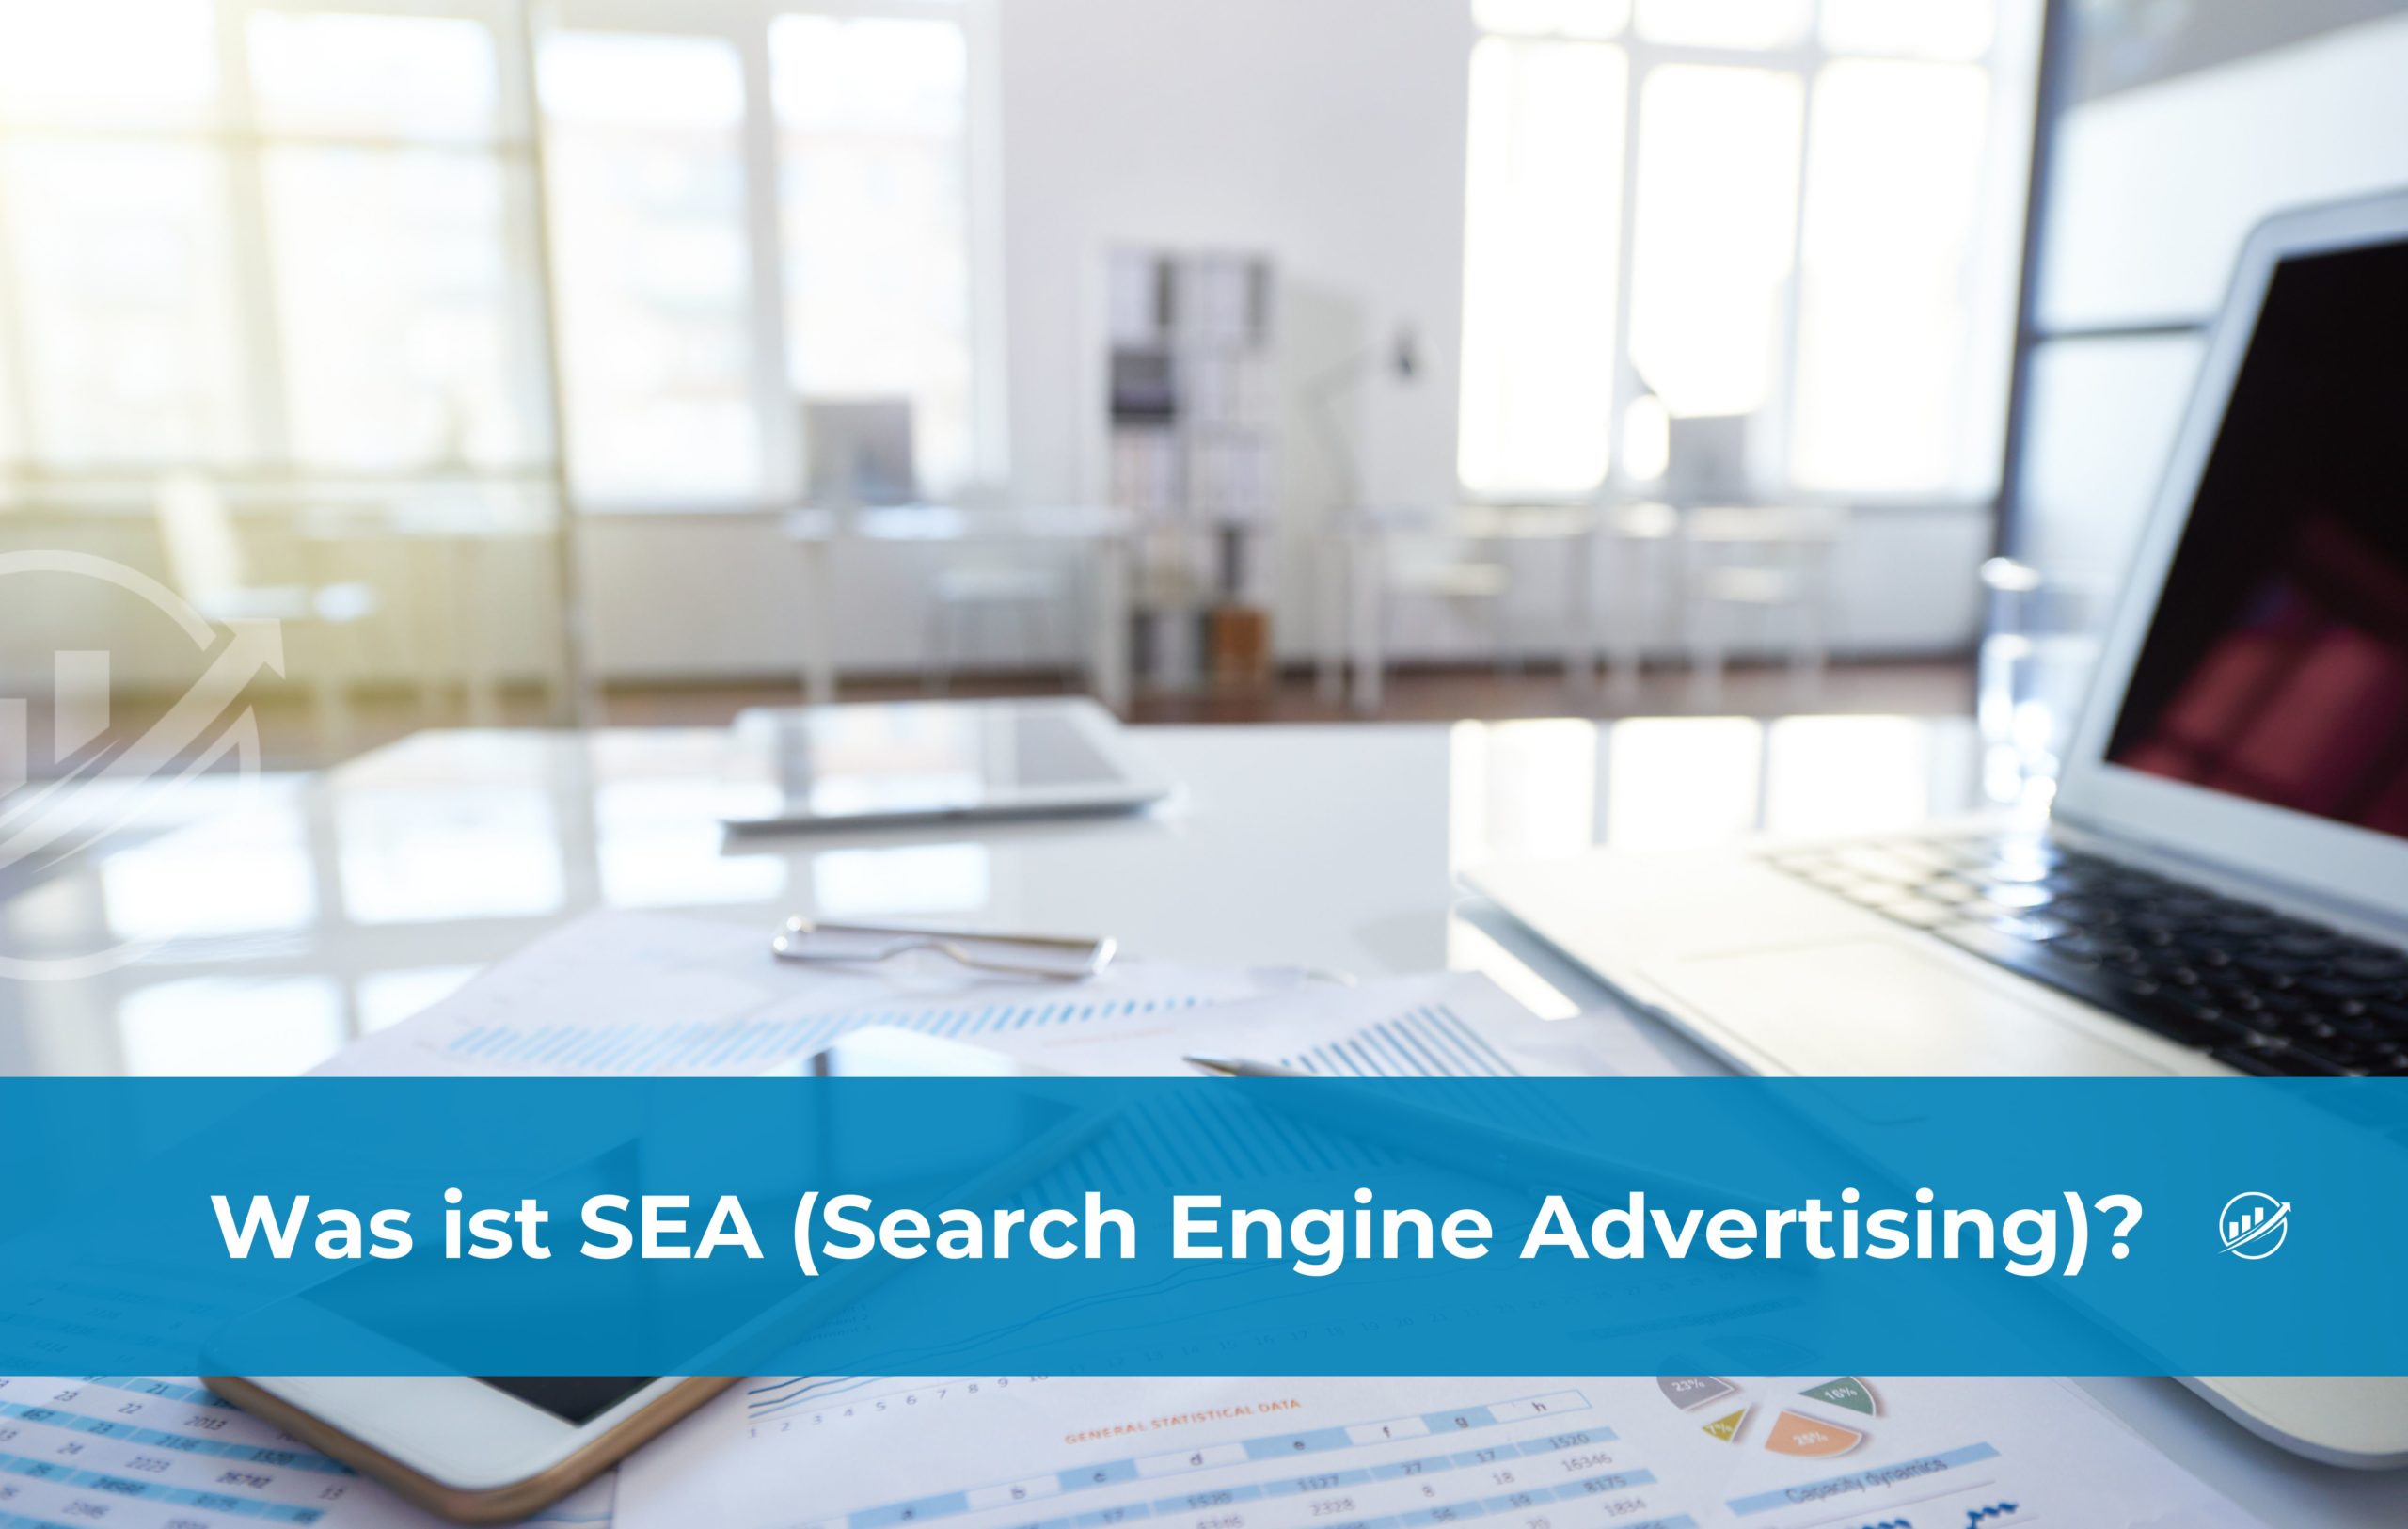 Was ist SEA (Search Engine Advertising)?